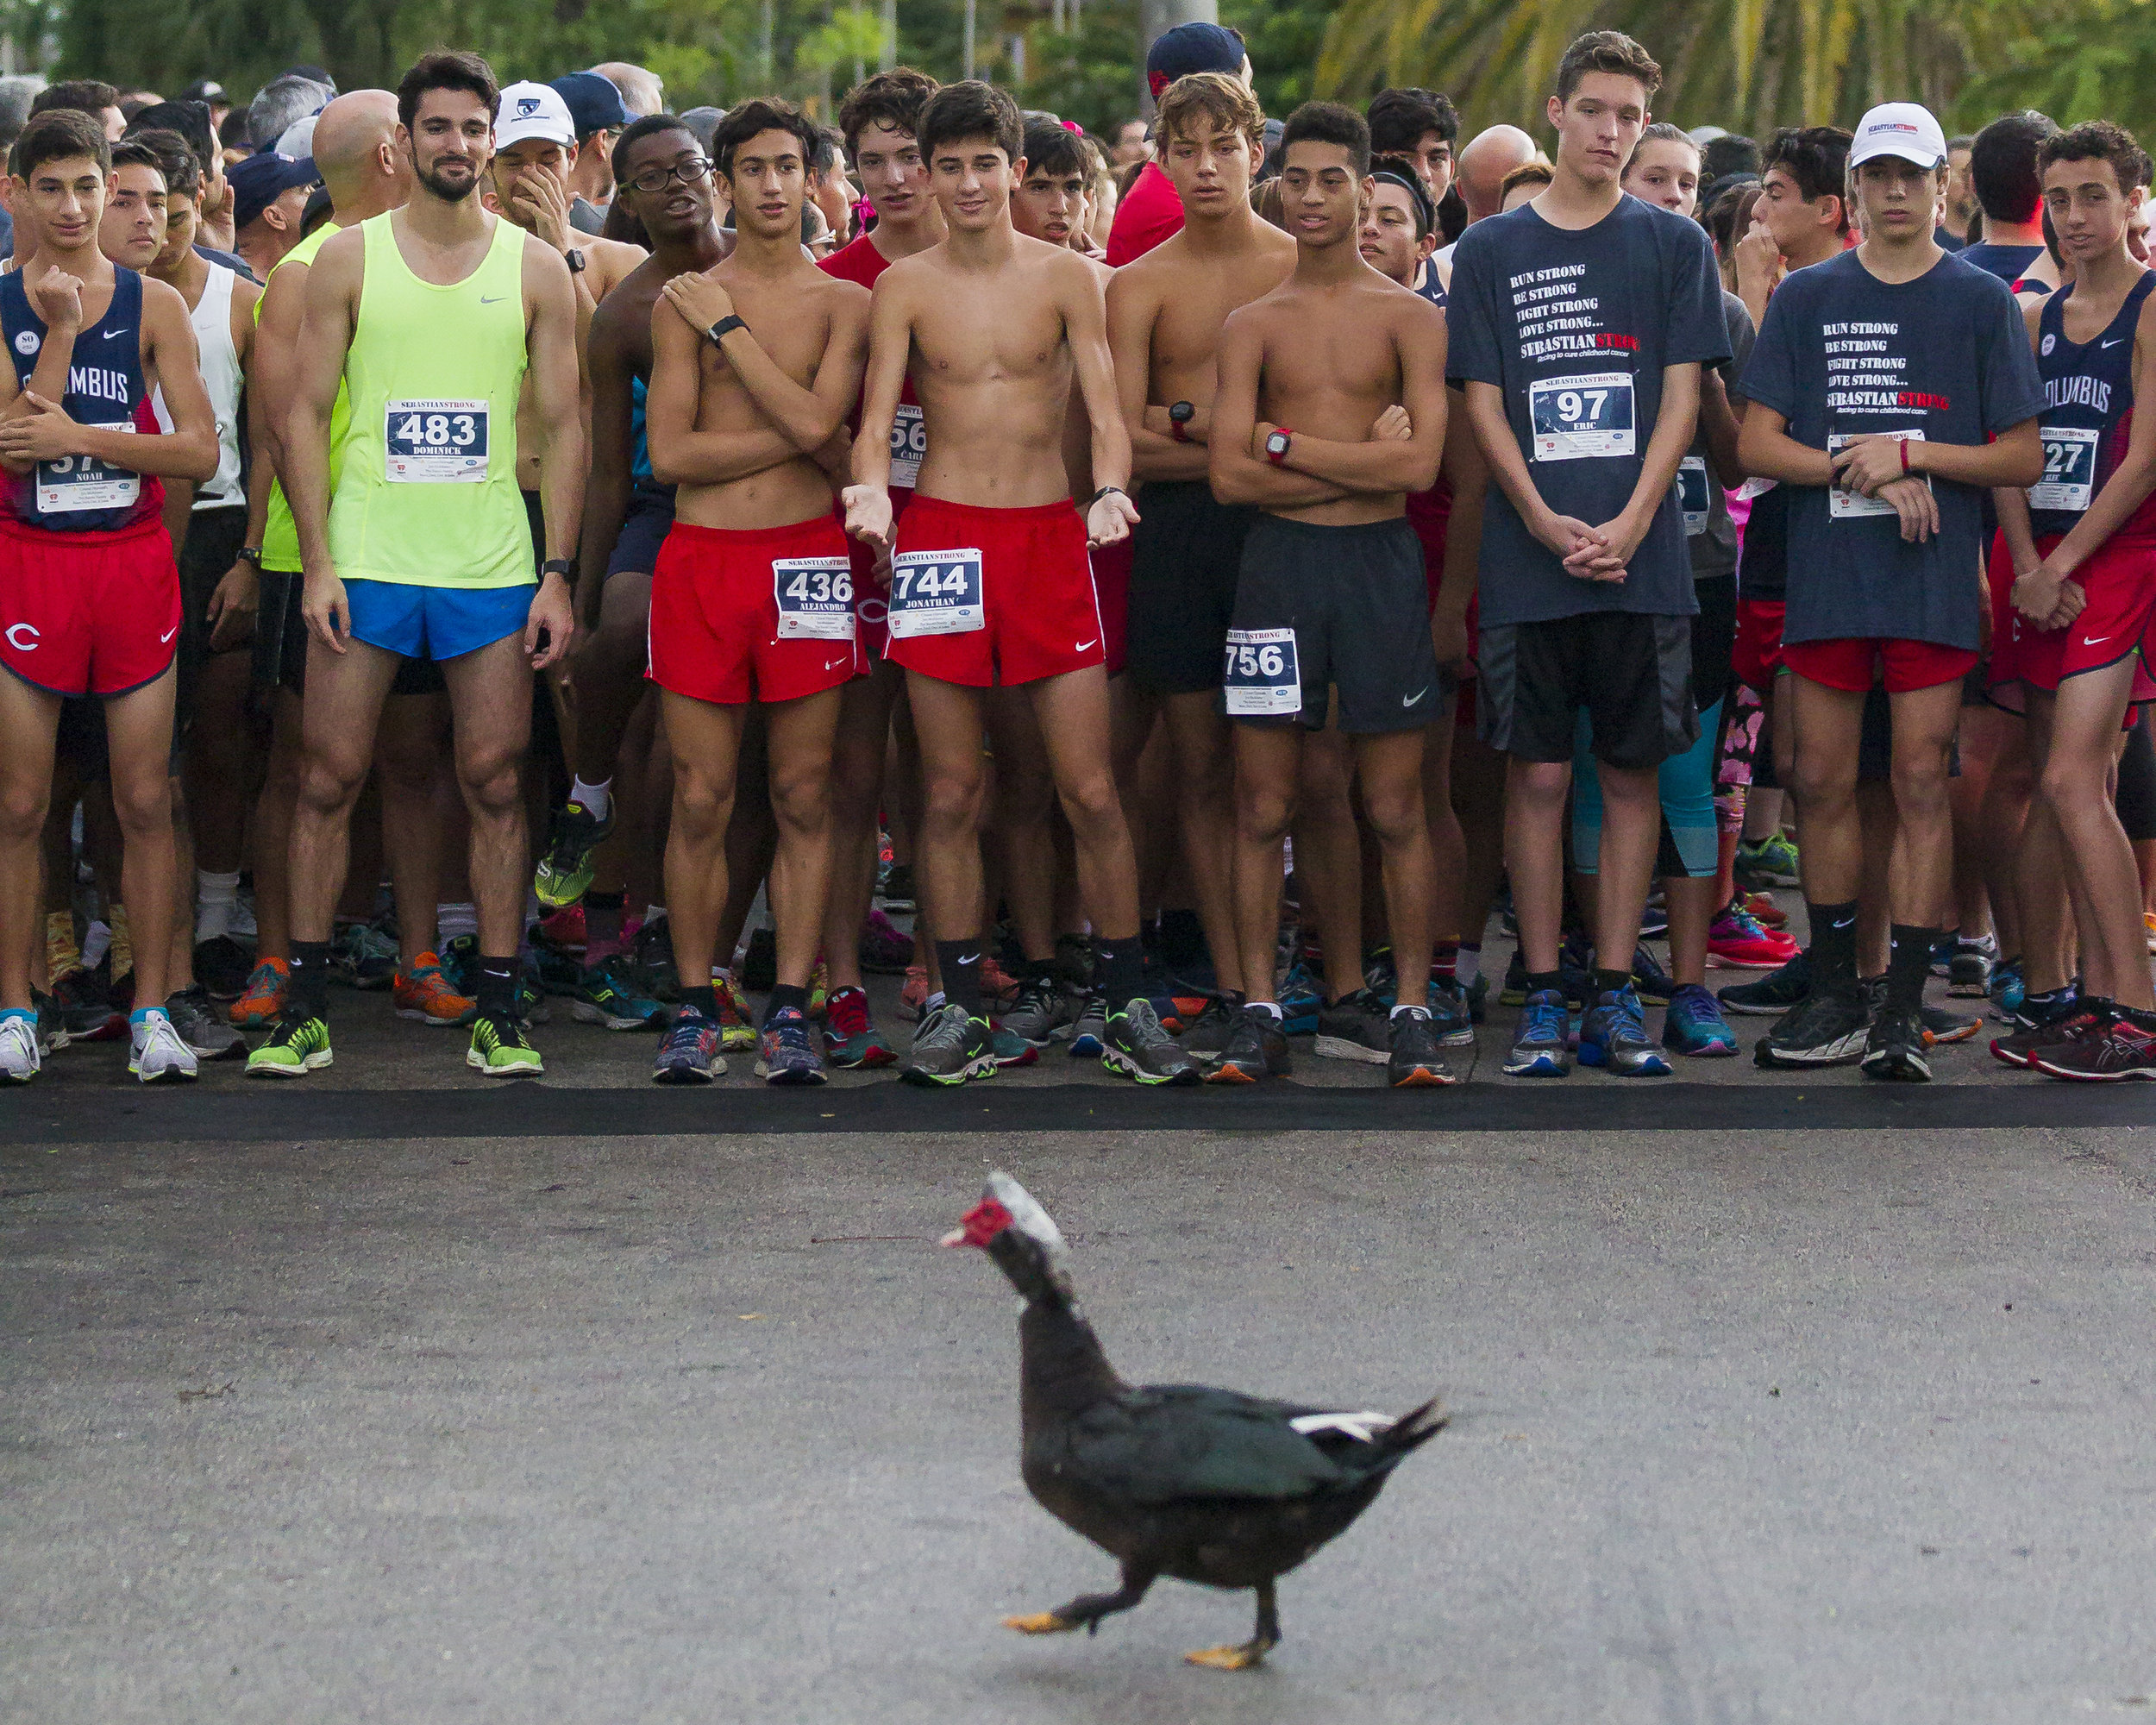  A duck walks in front of participants before the start of the SebastianStrong 5K in Miami Springs on Saturday, Nov. 4, 2017. The event aims to raise awareness, fund research into curing childhood cancer and honoring Sebastian's life. 